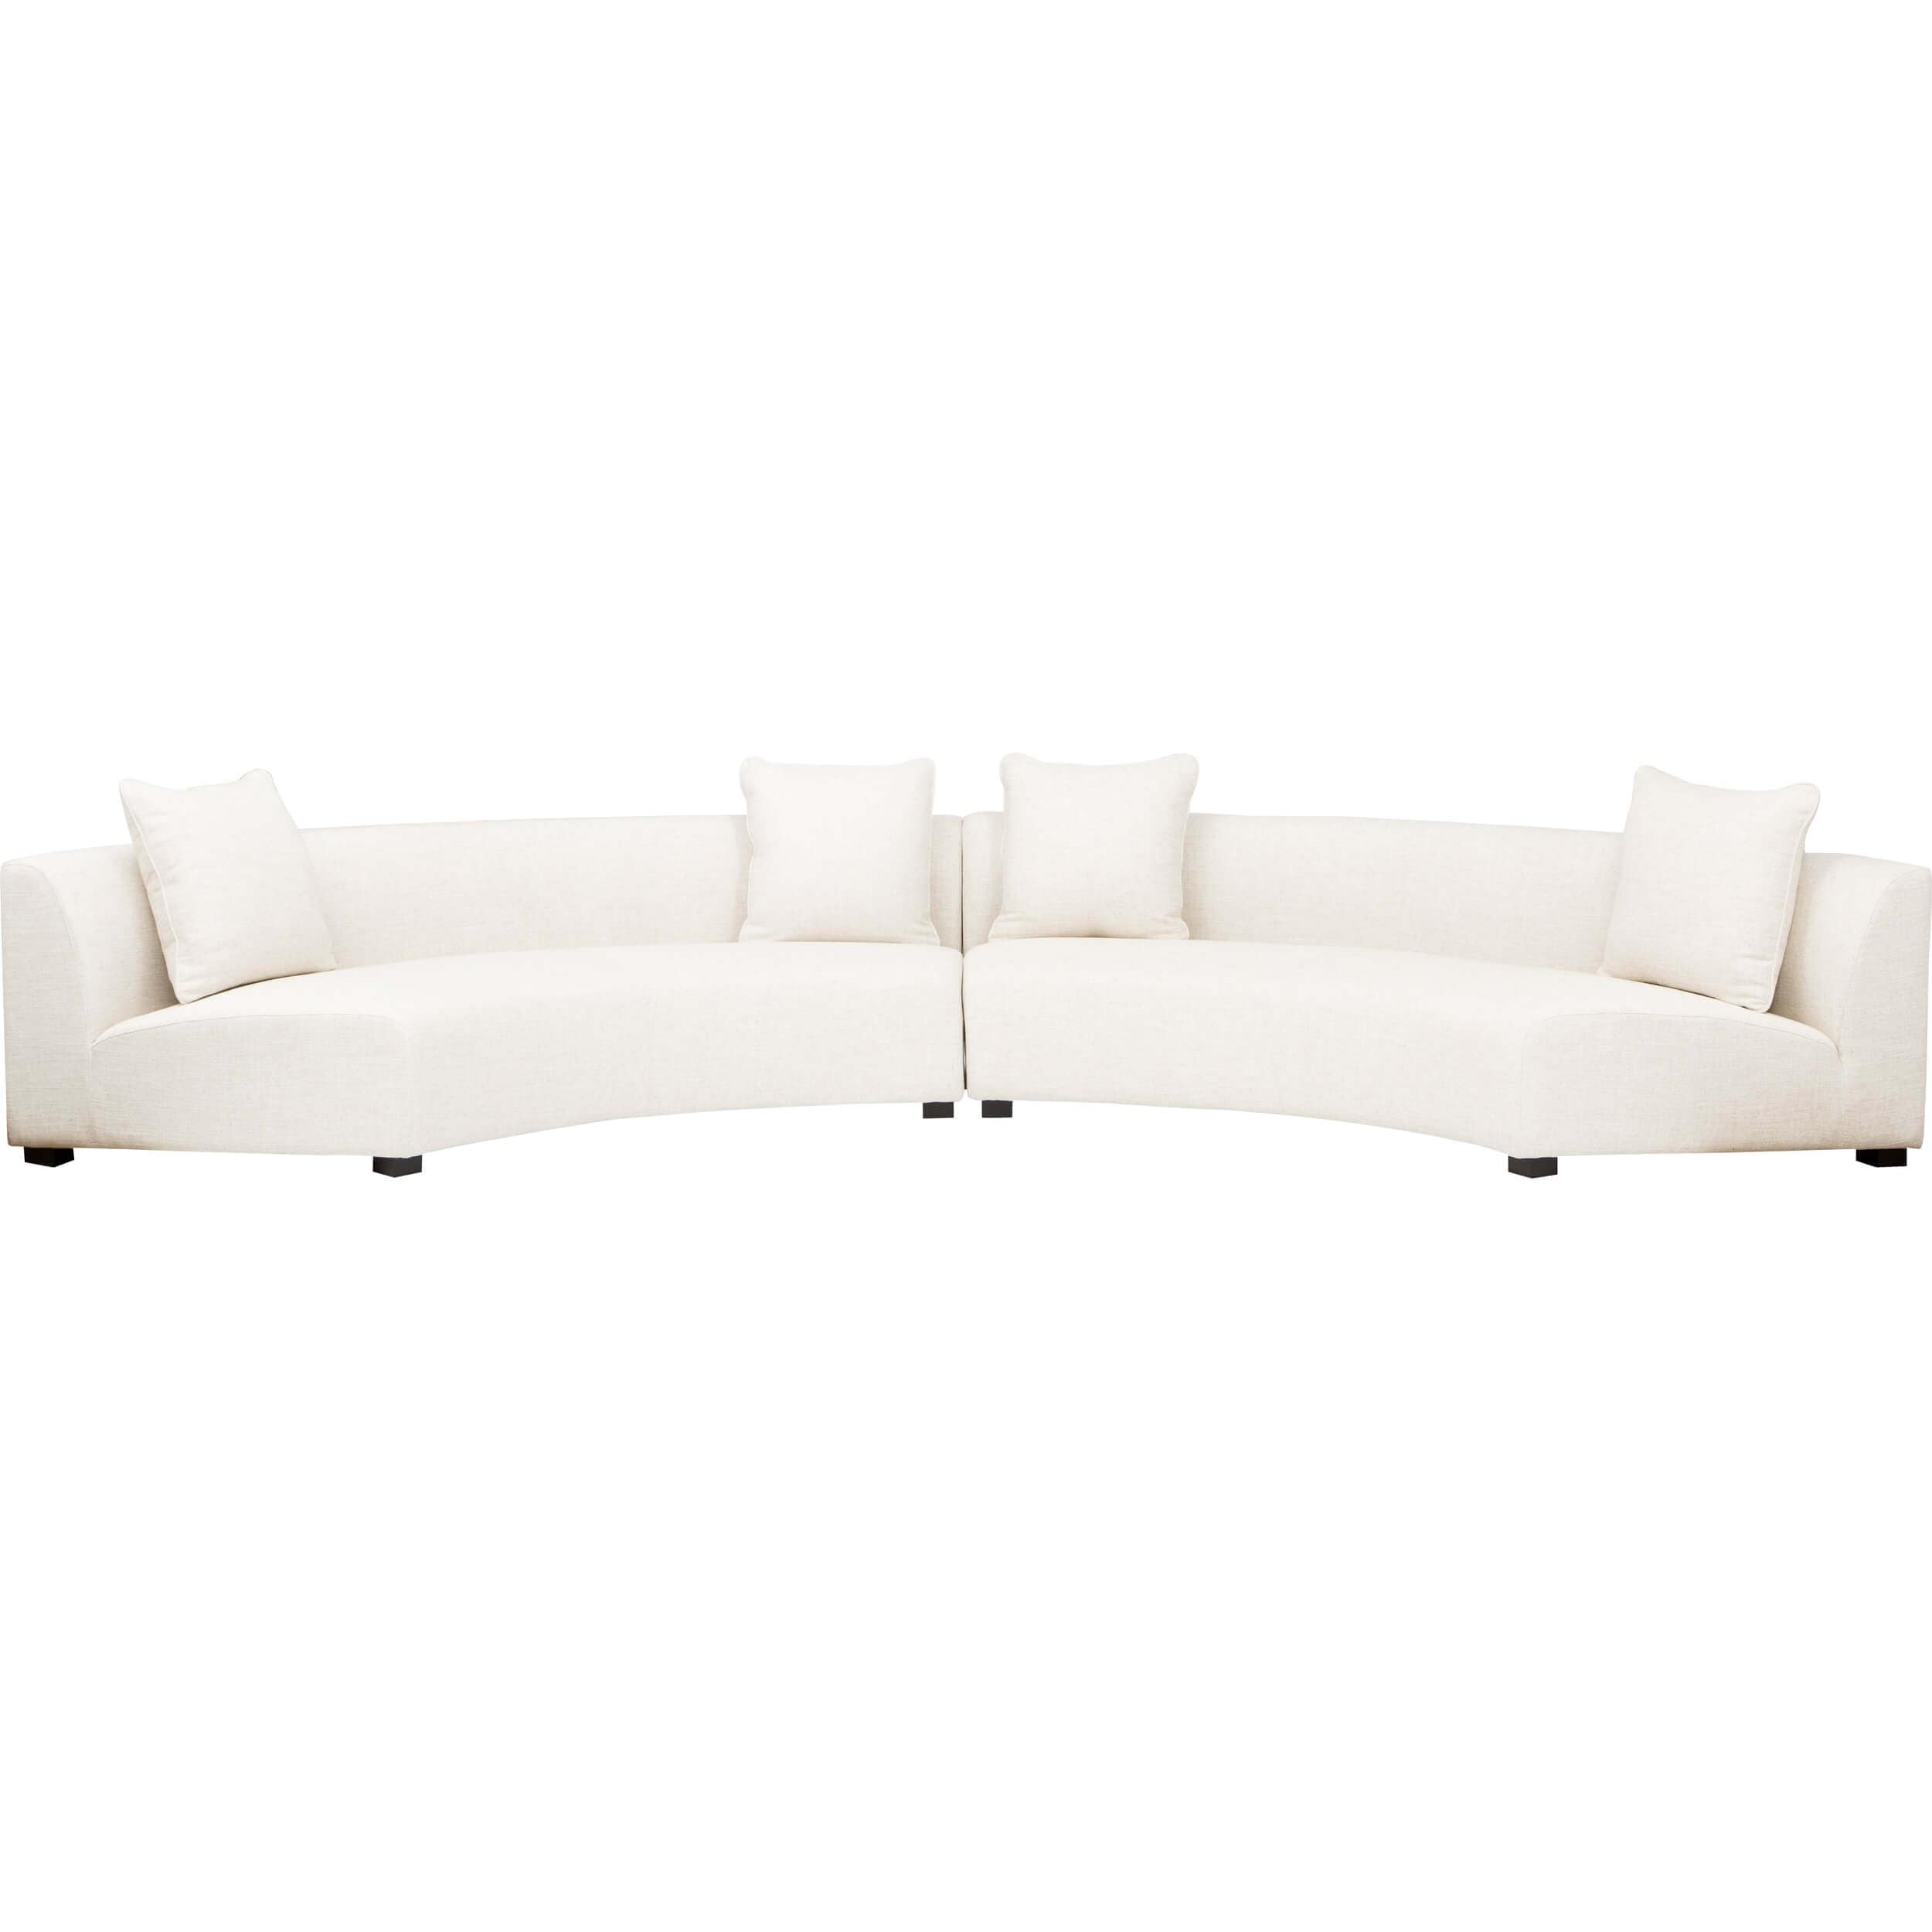 Image of Liam Sectional, Dover Crescent